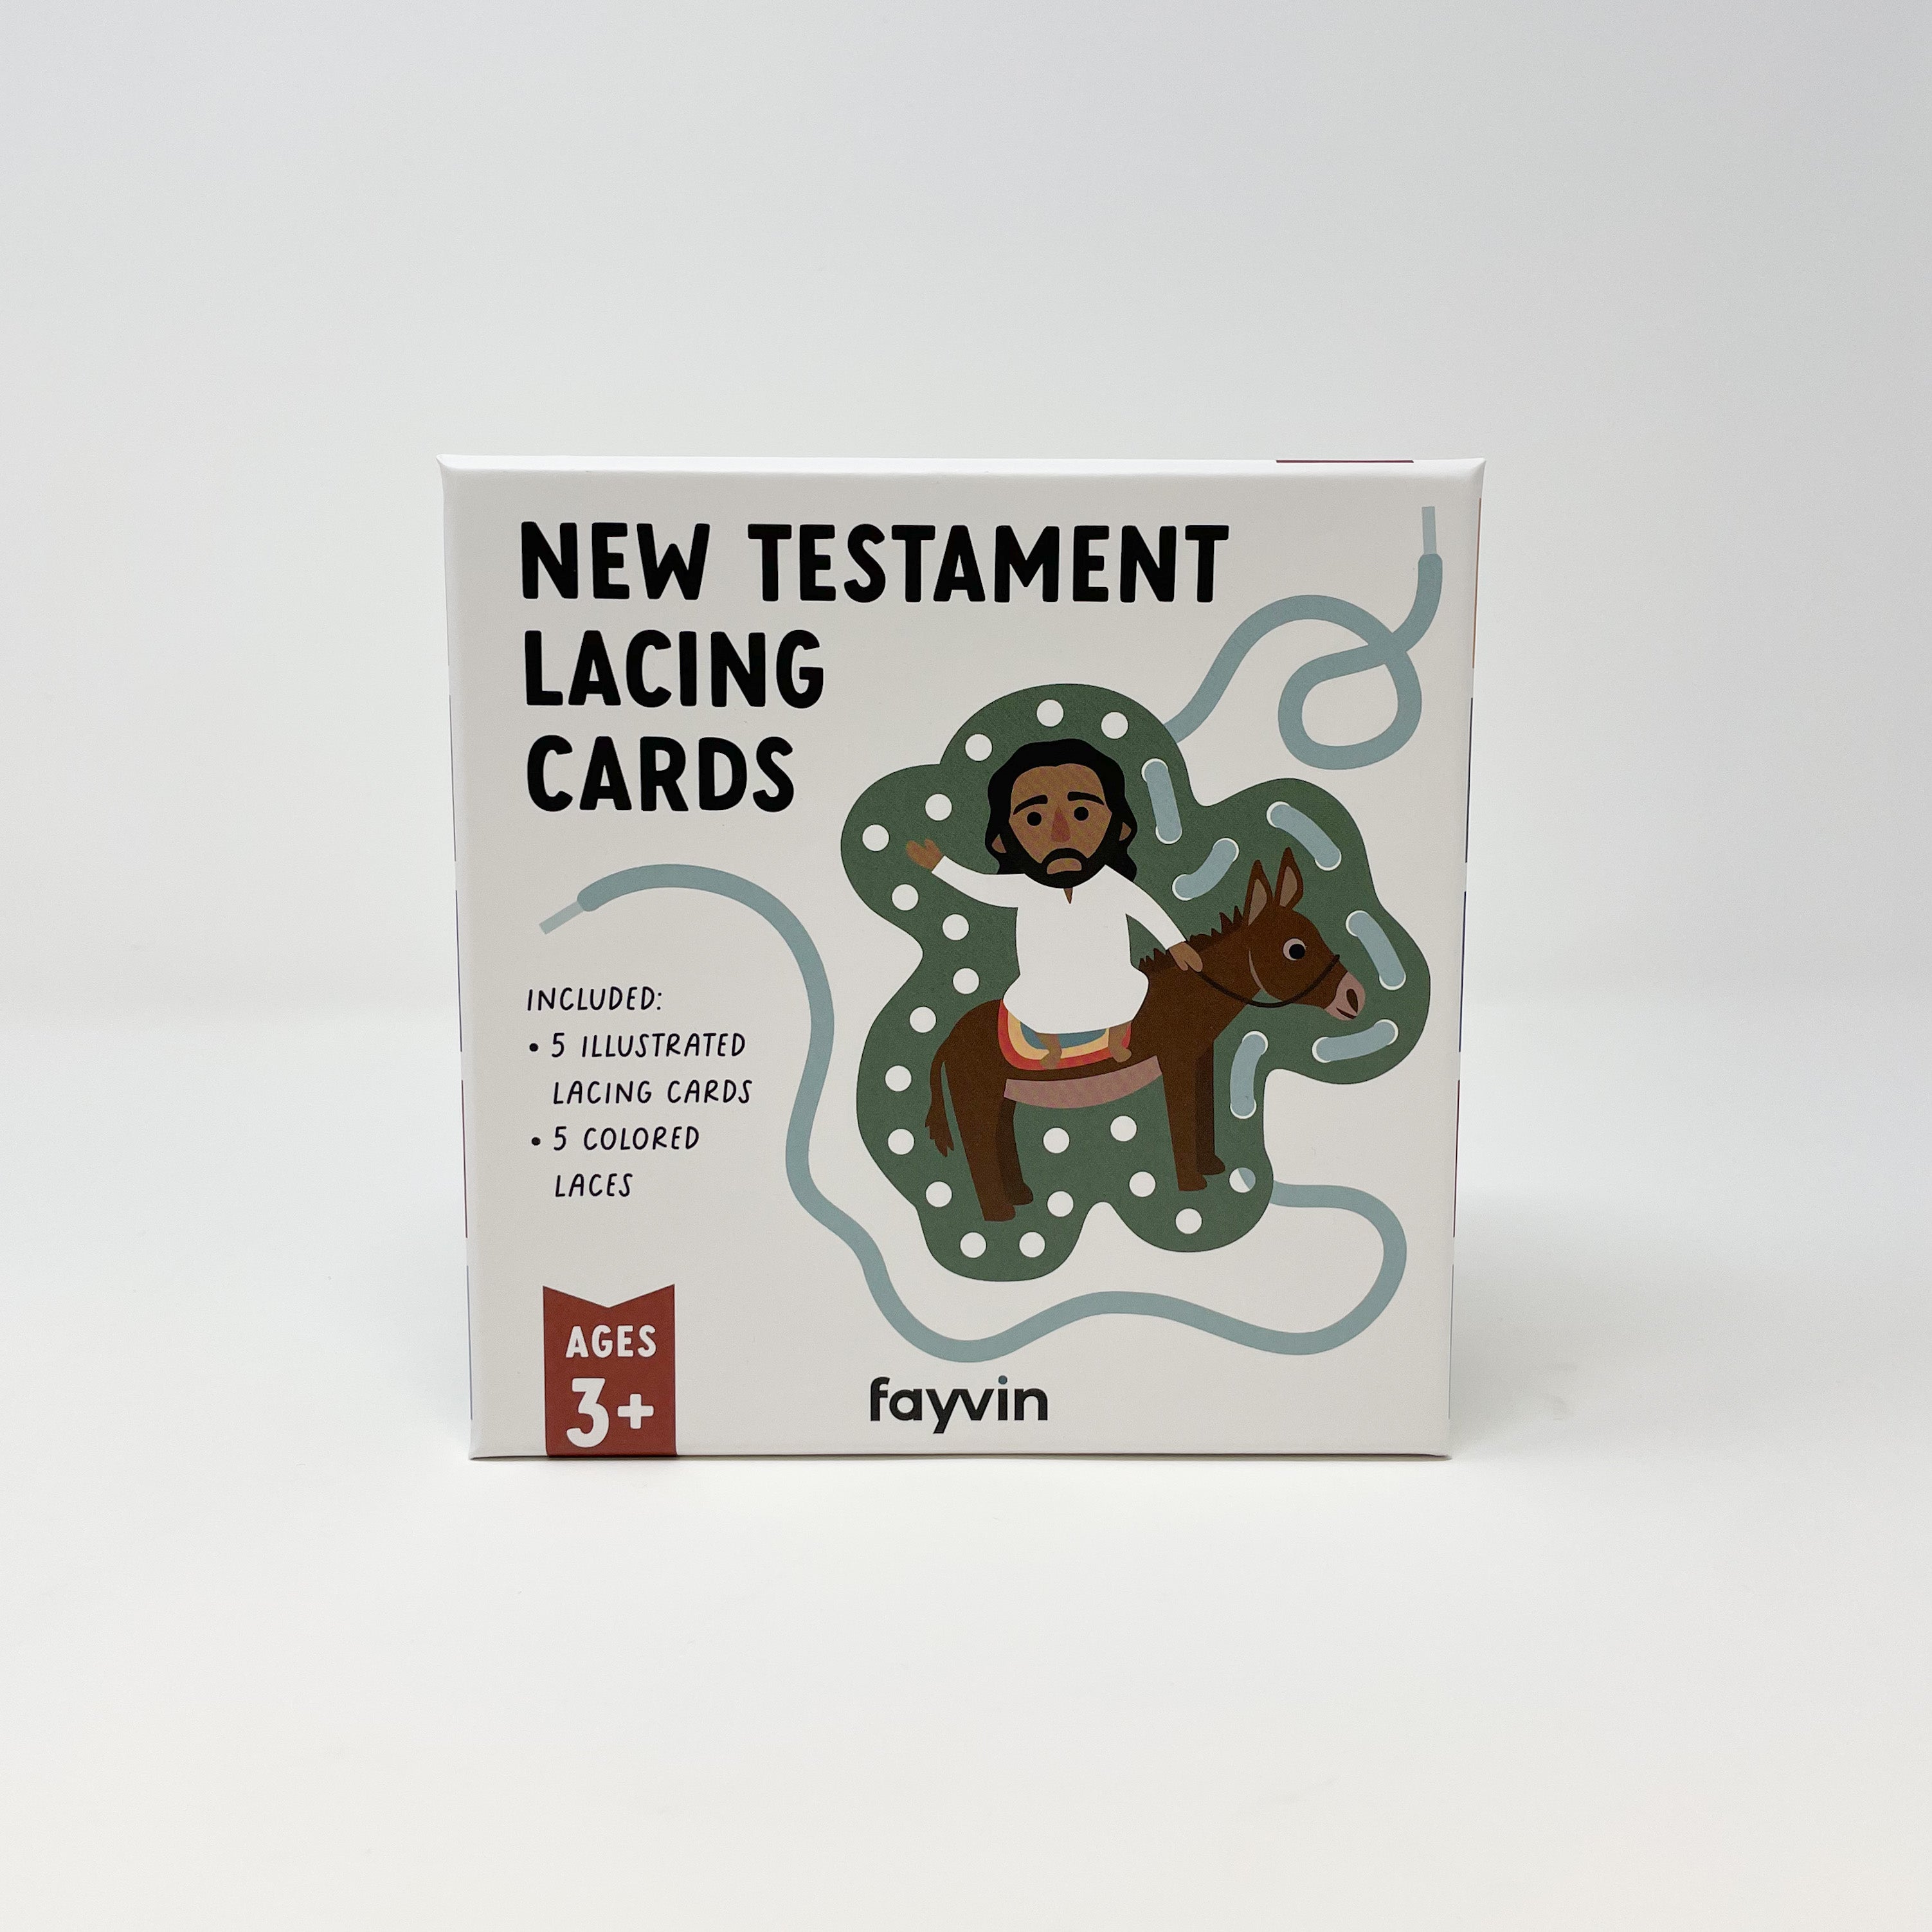 New Testament Lacing Cards